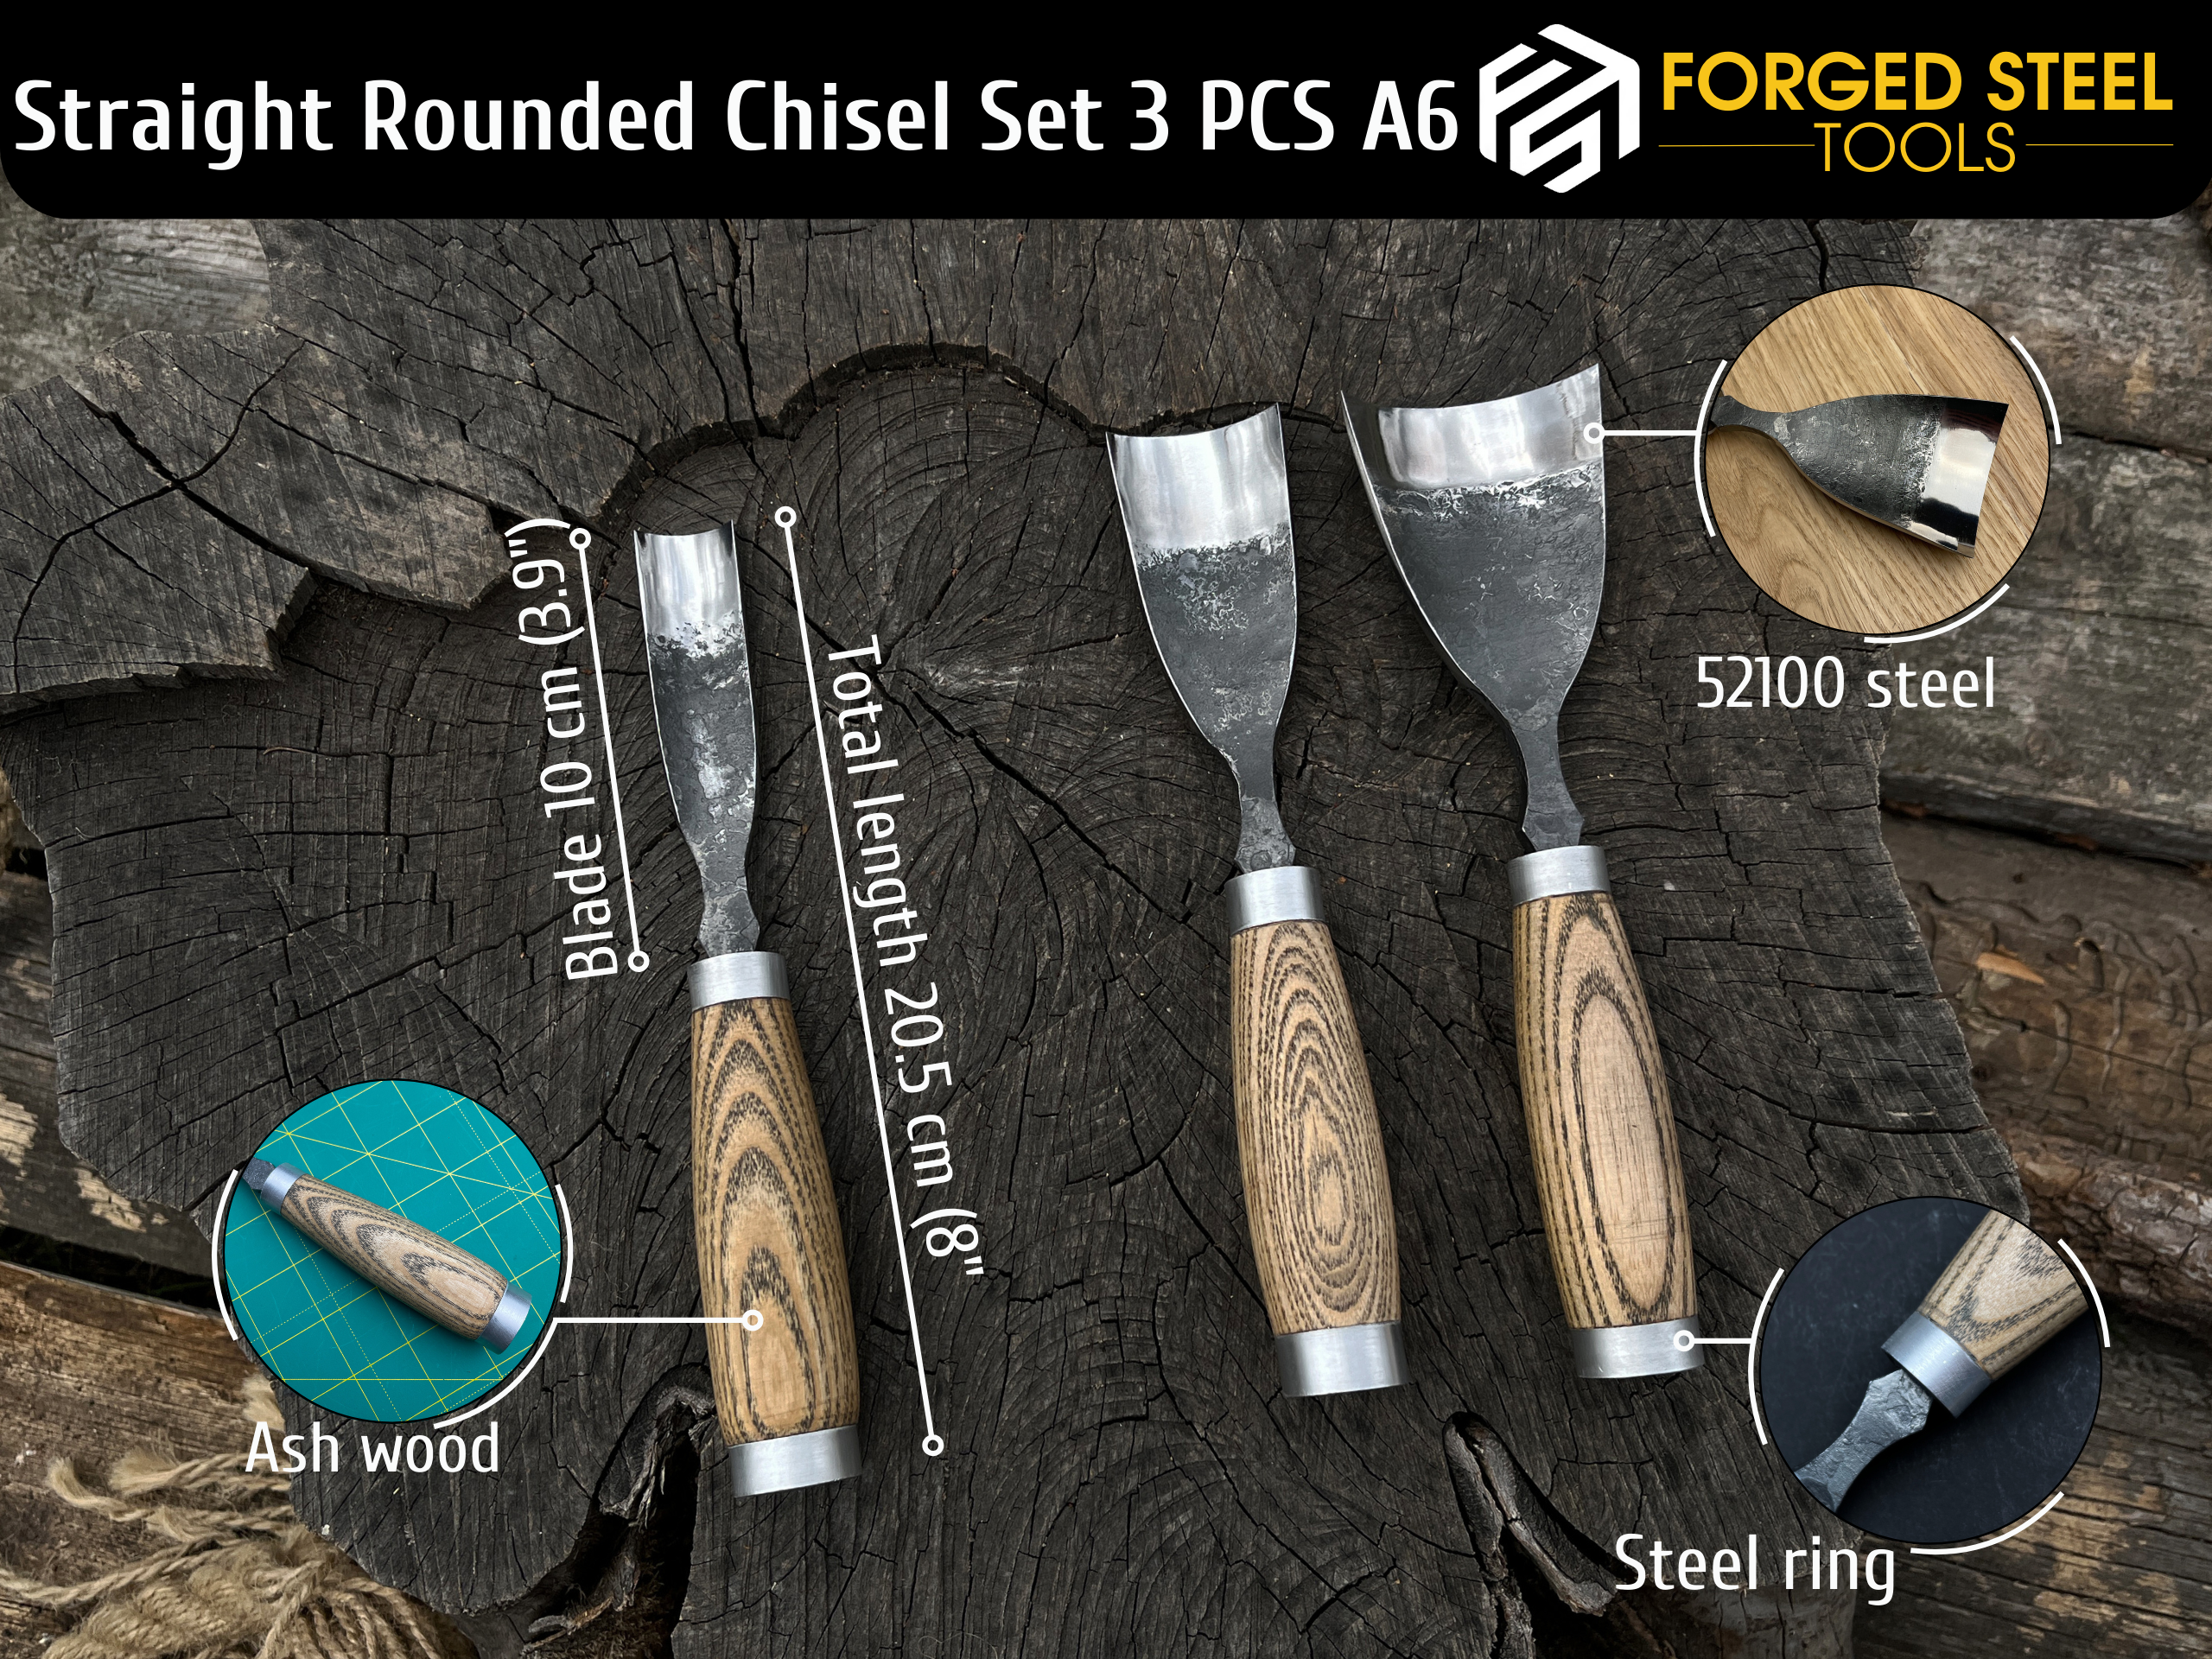 3-Piece Hand-Forged Straight Rounded Chisel